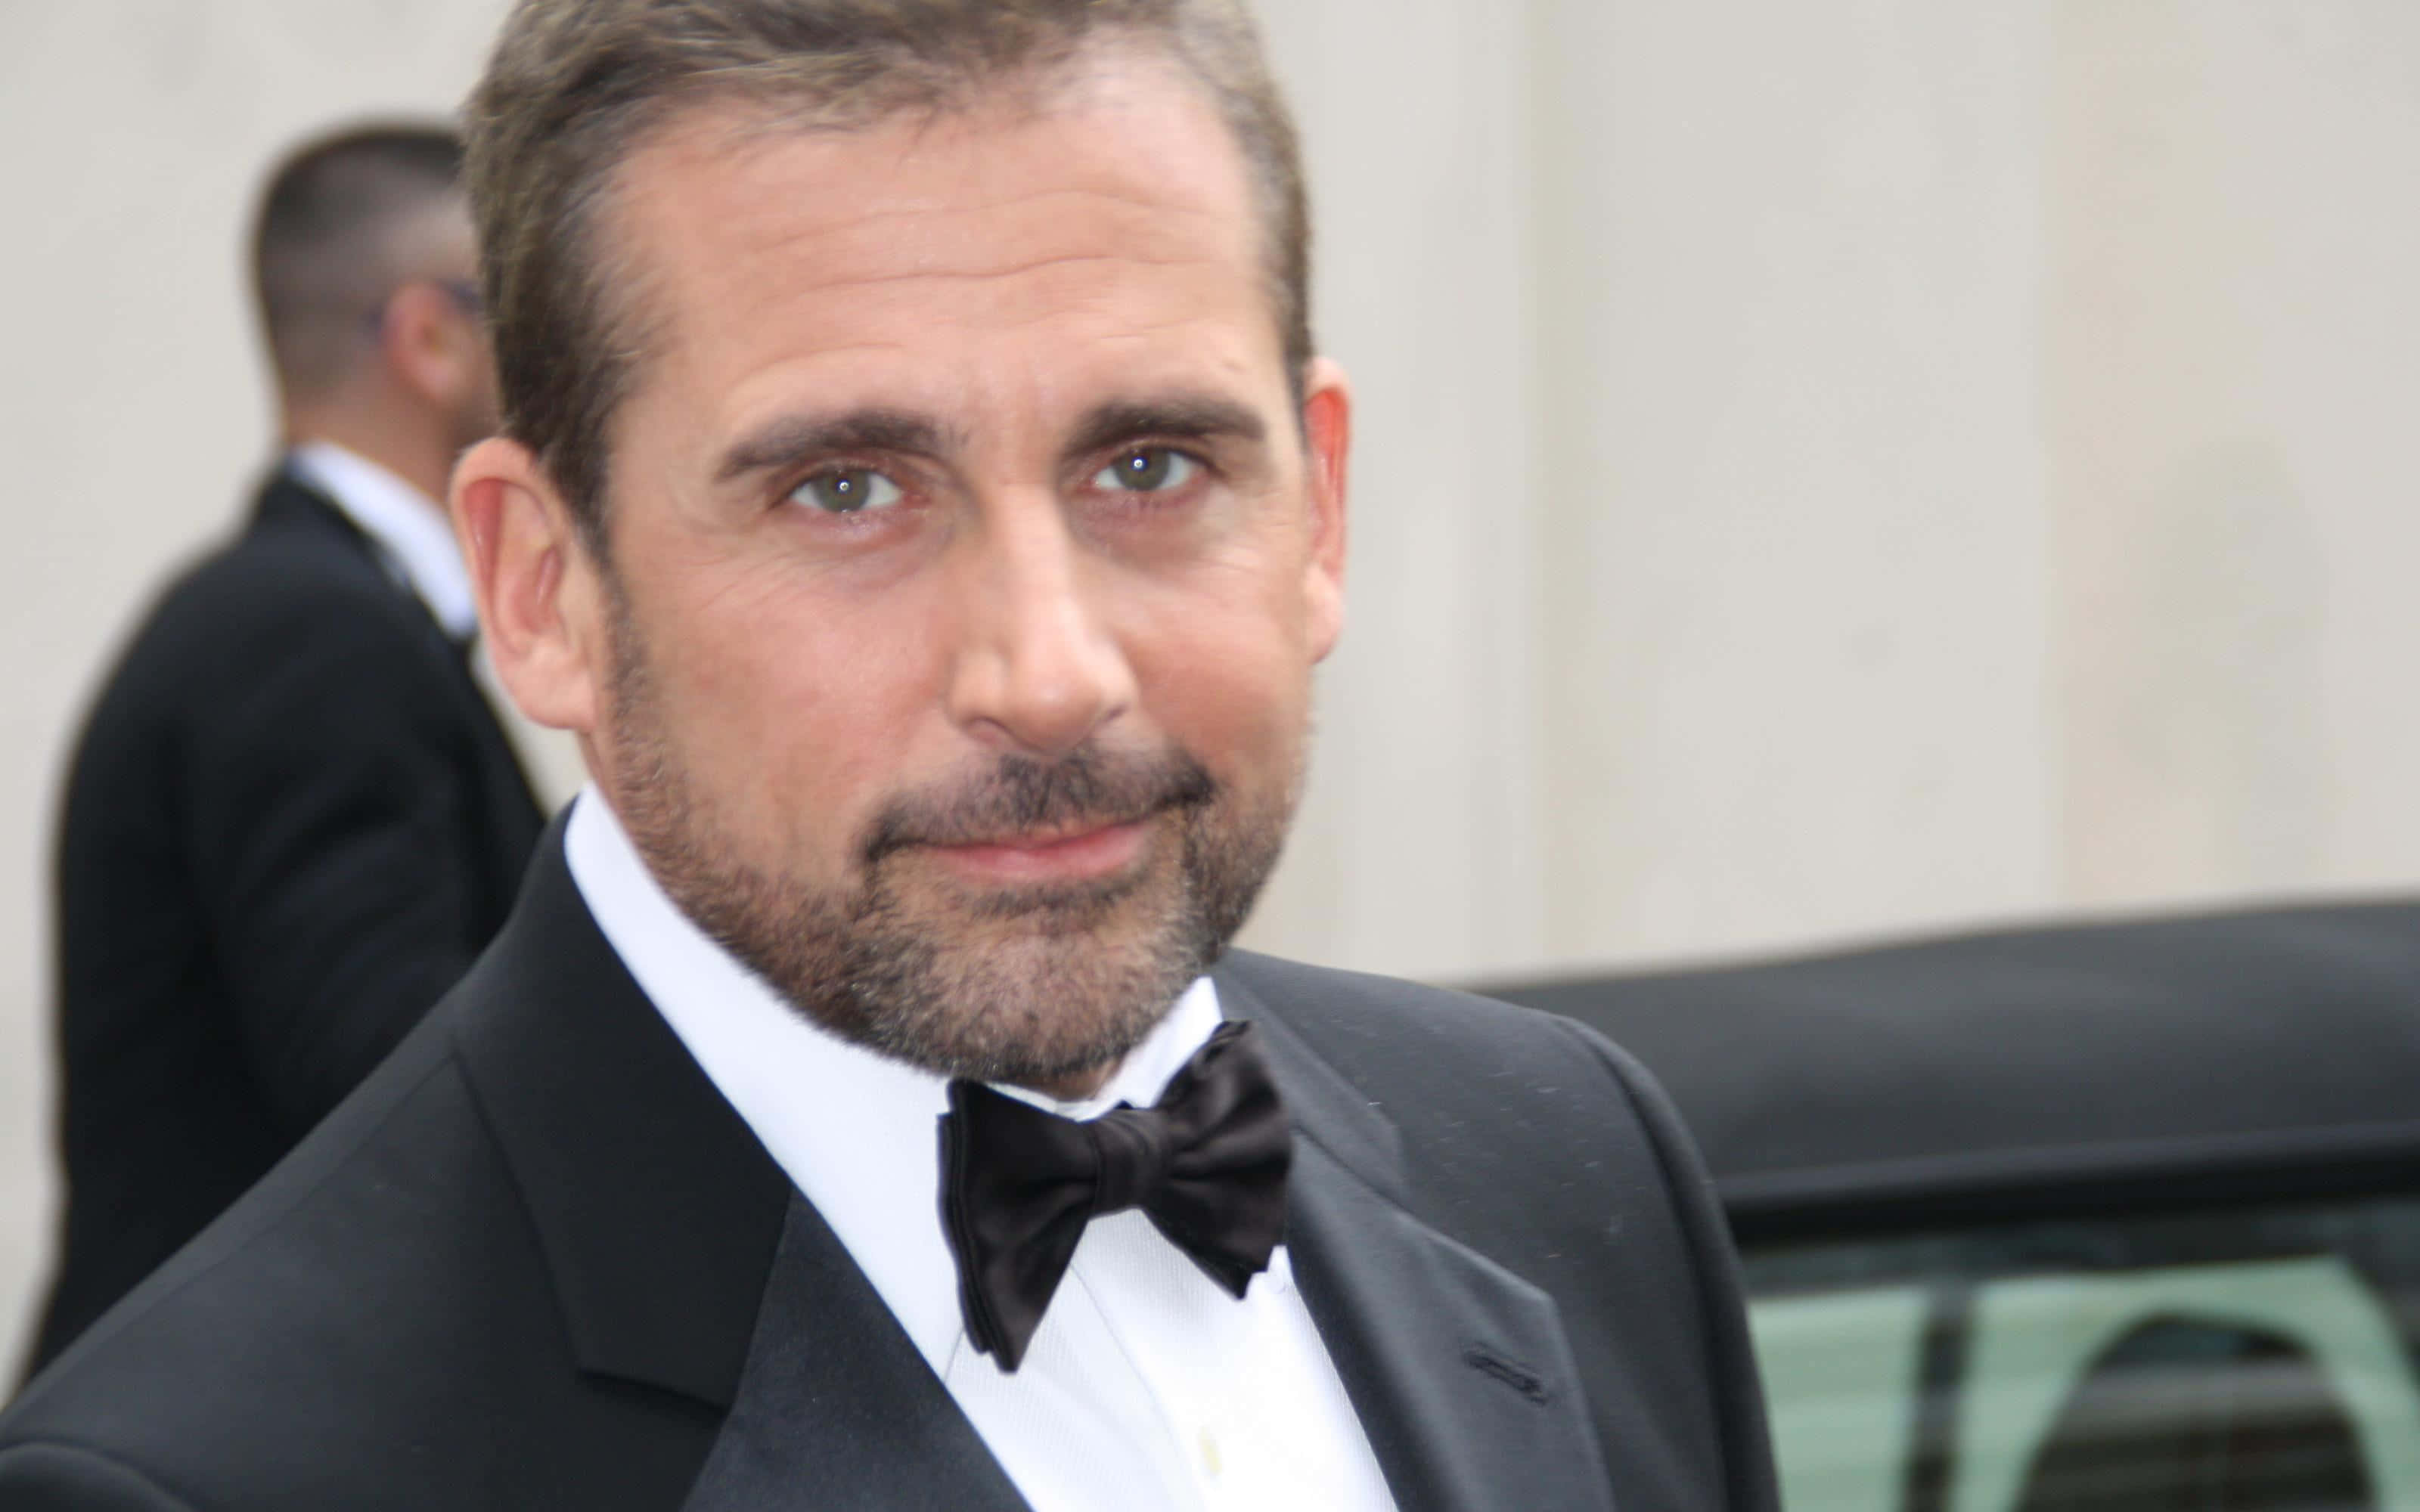 Steve Carell - Actor, Producer, and Comedian Wallpaper